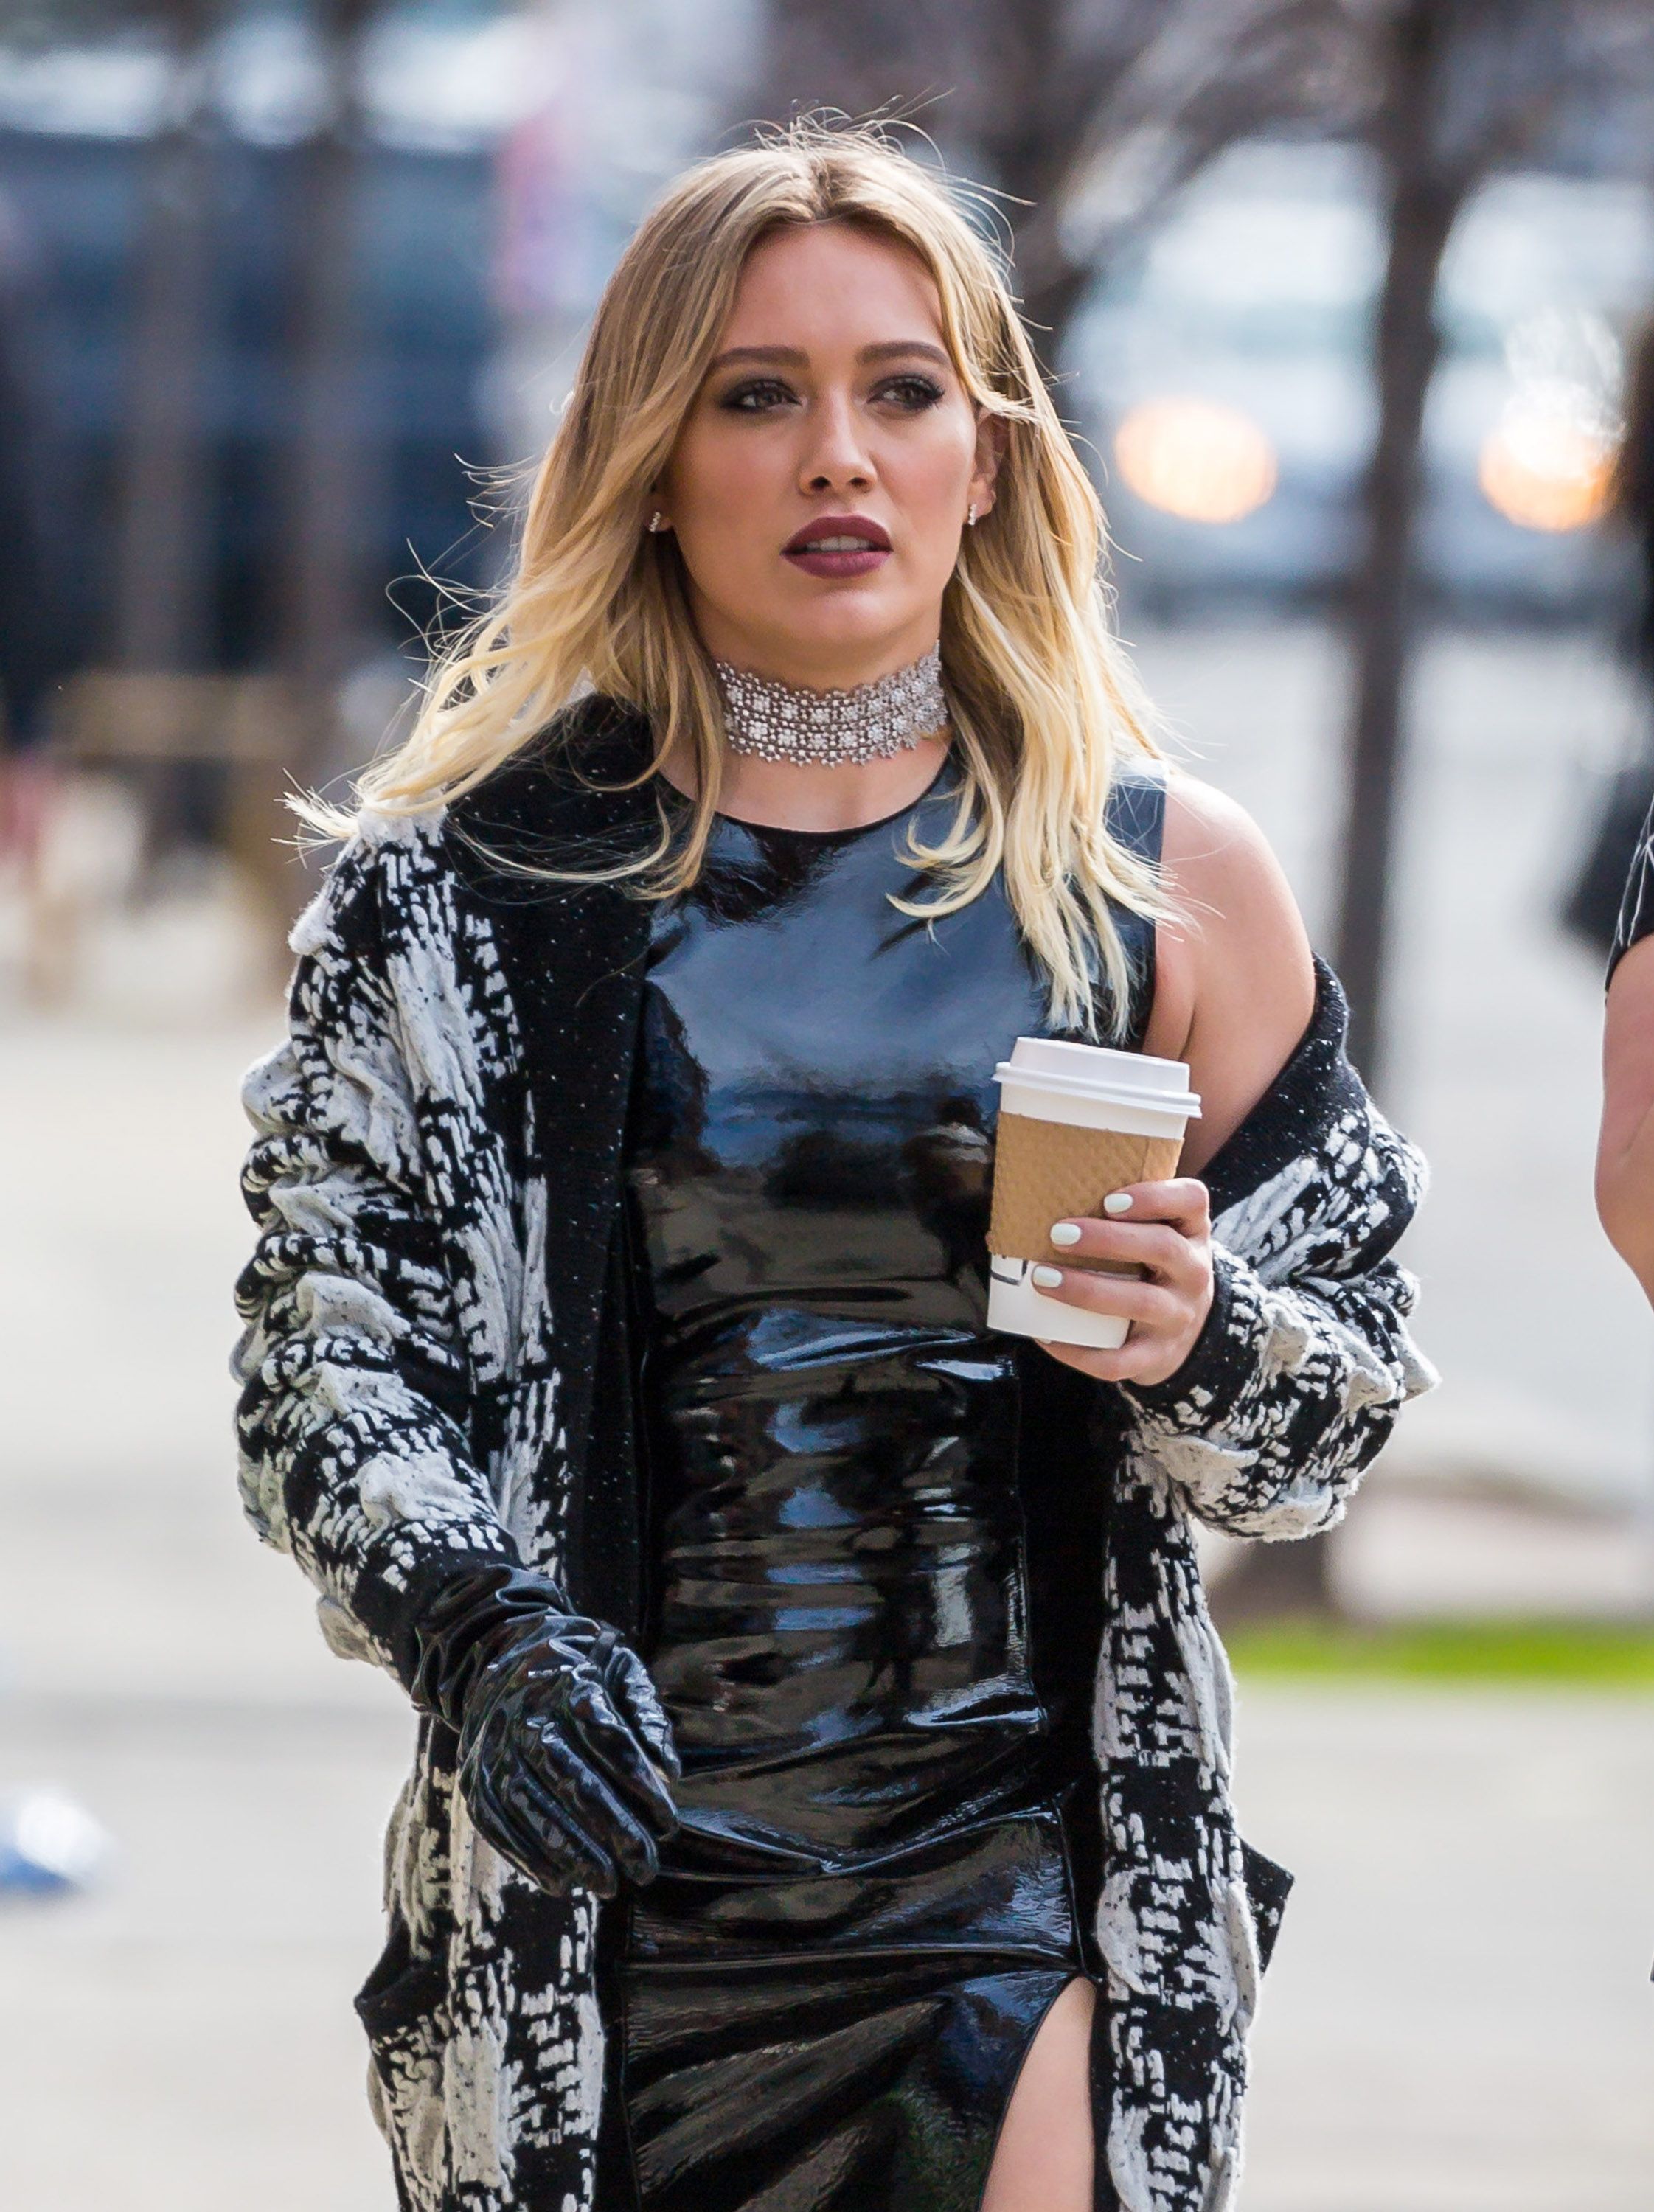 Hilary Duff Dressed In Leather, Looking Thick #79538559